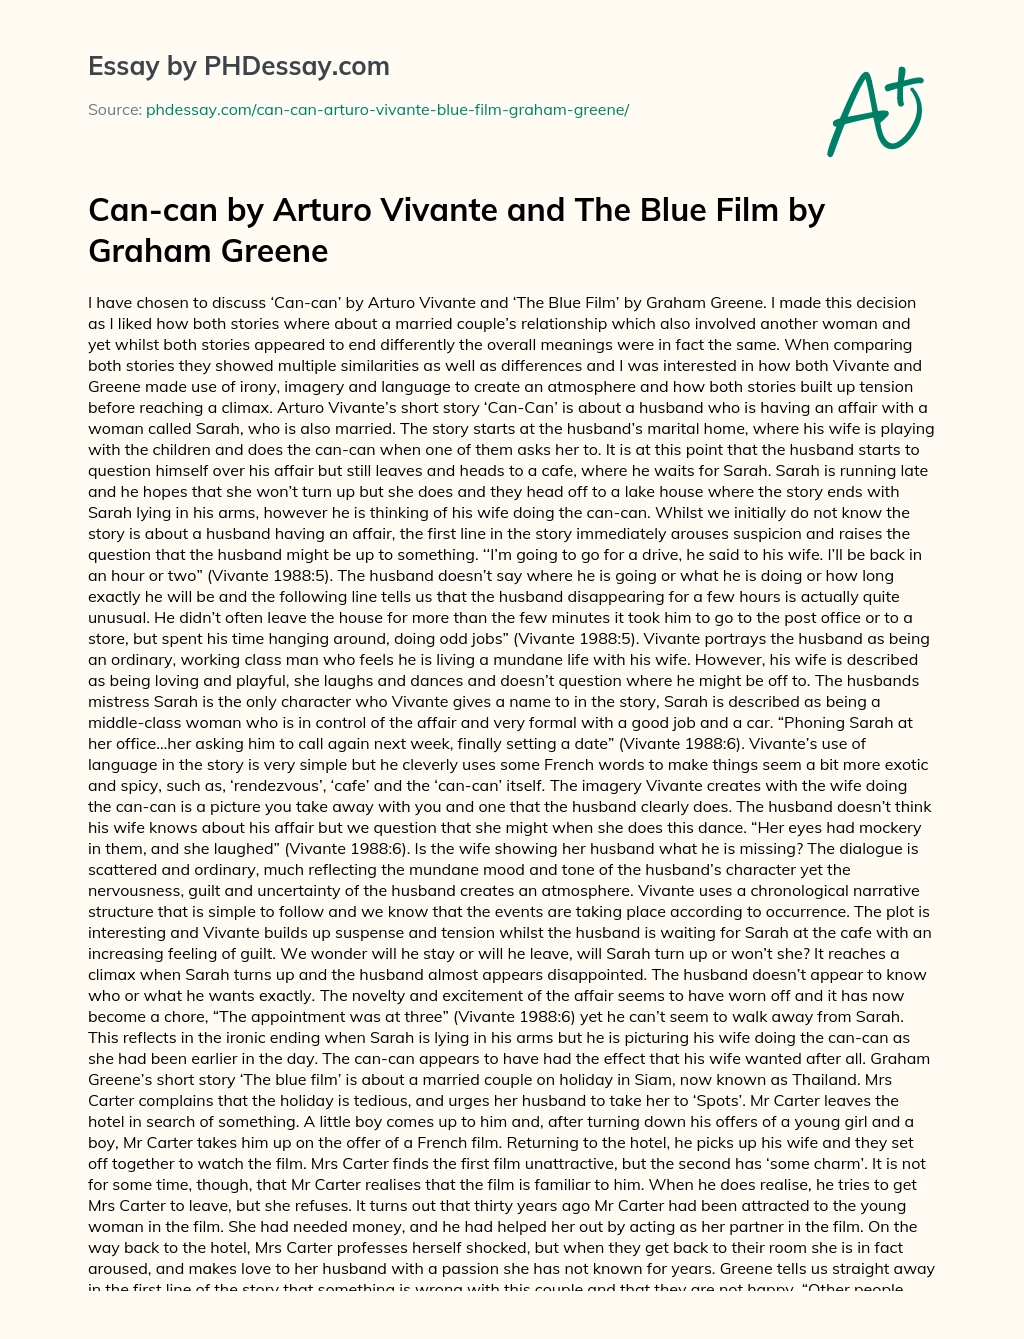 Can-can by Arturo Vivante and The Blue Film by Graham Greene essay